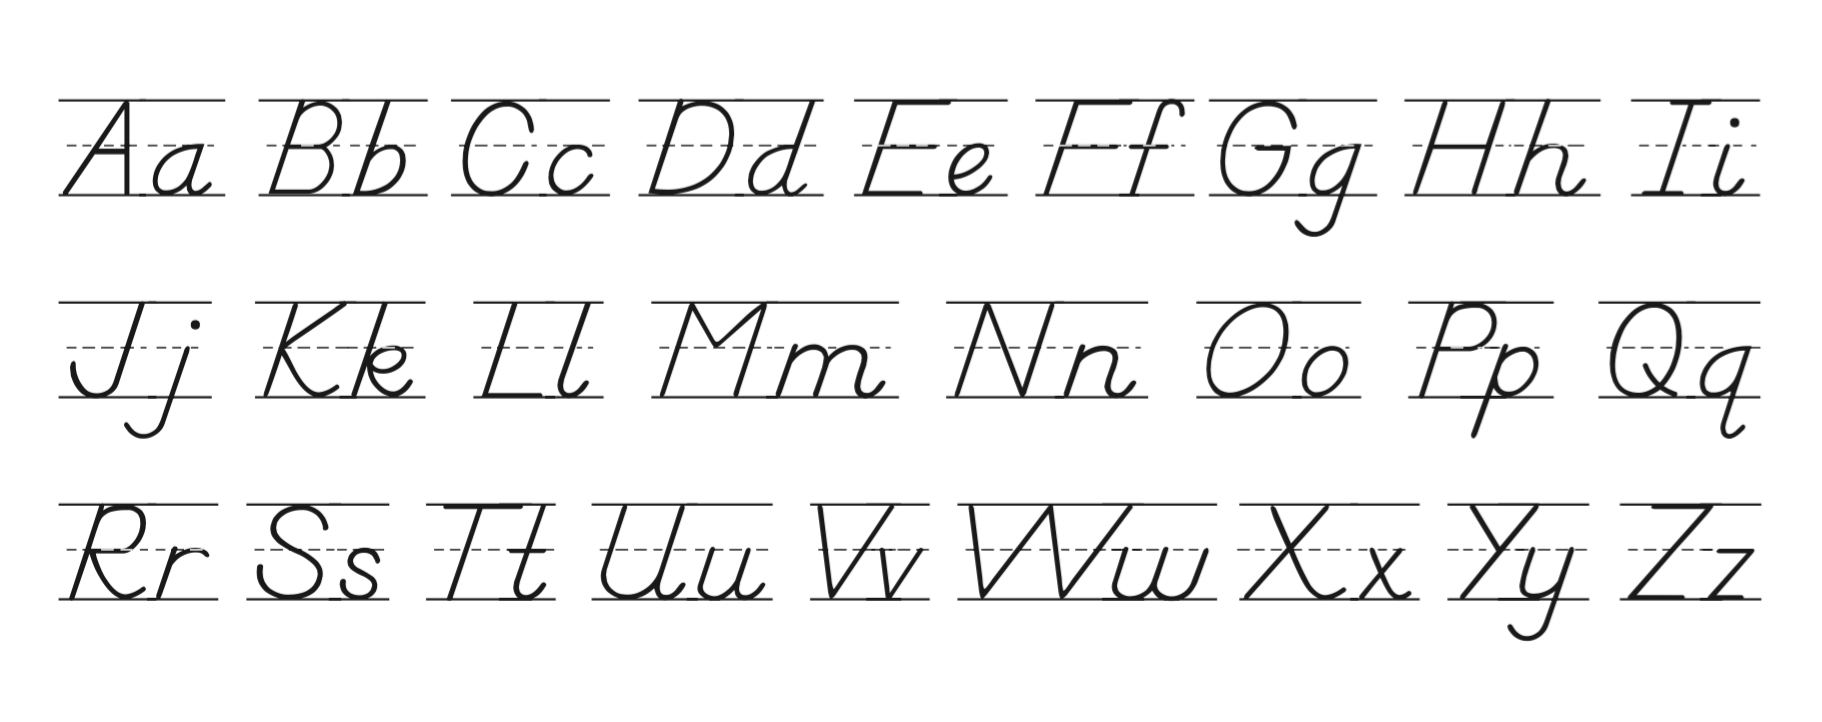 cursive font generator whats the fancy line under a word called